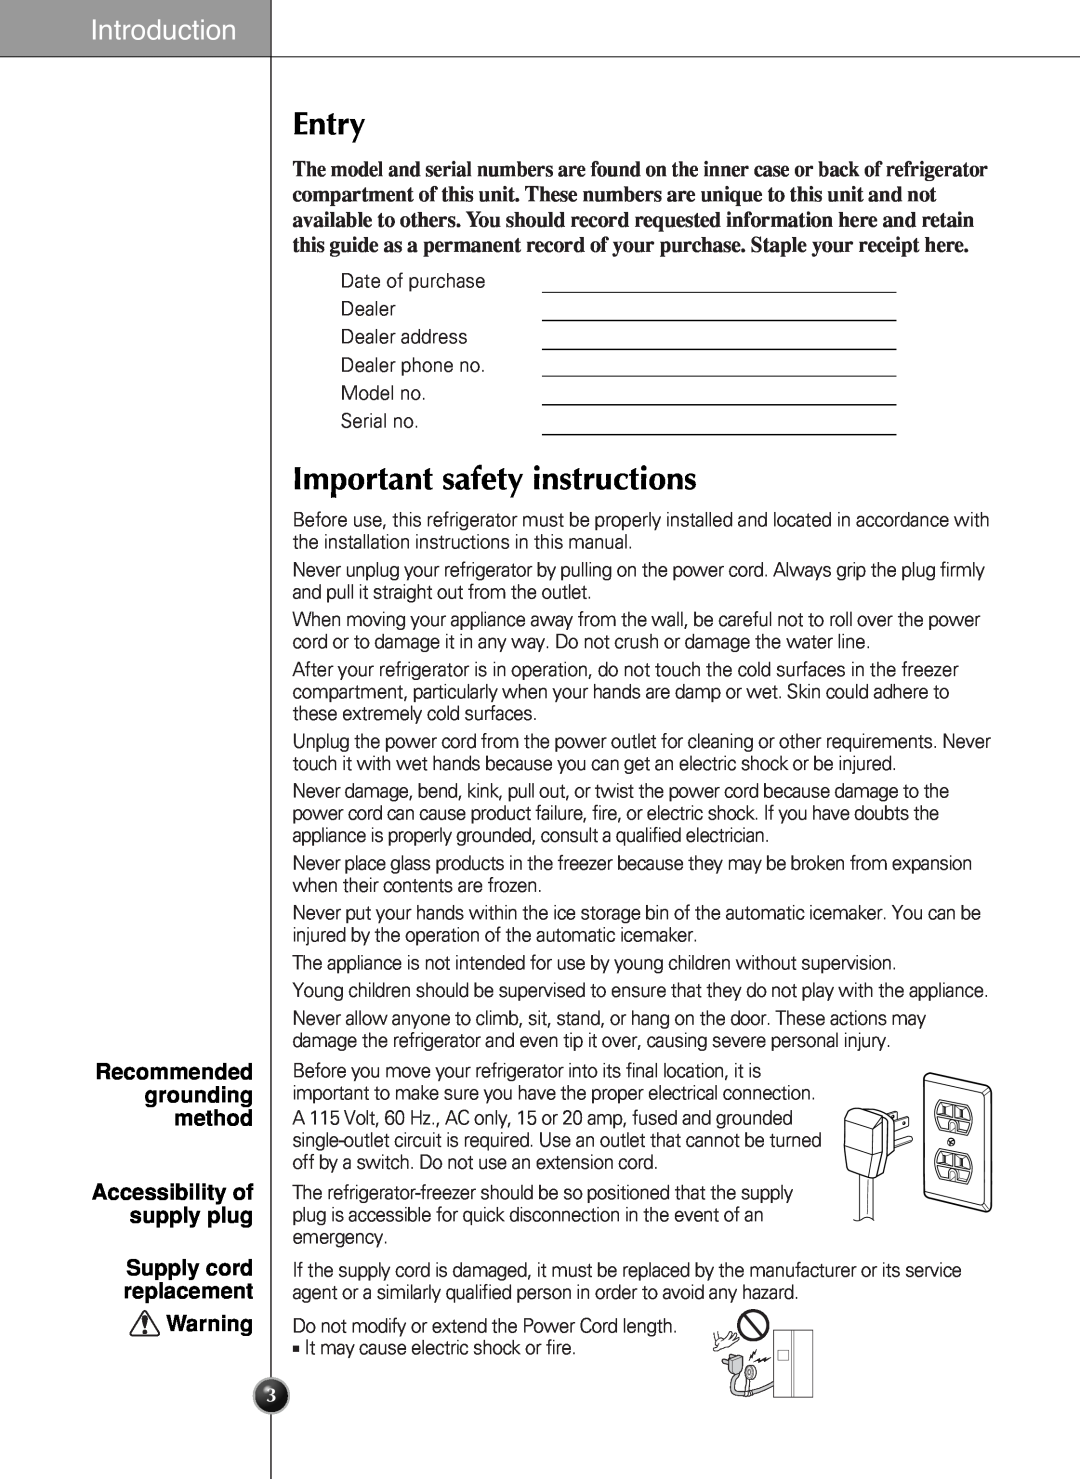 LG Electronics LSC 27960ST, LSC 27950ST manual Entry, Important safety instructions, Introduction, Supply cord replacement 